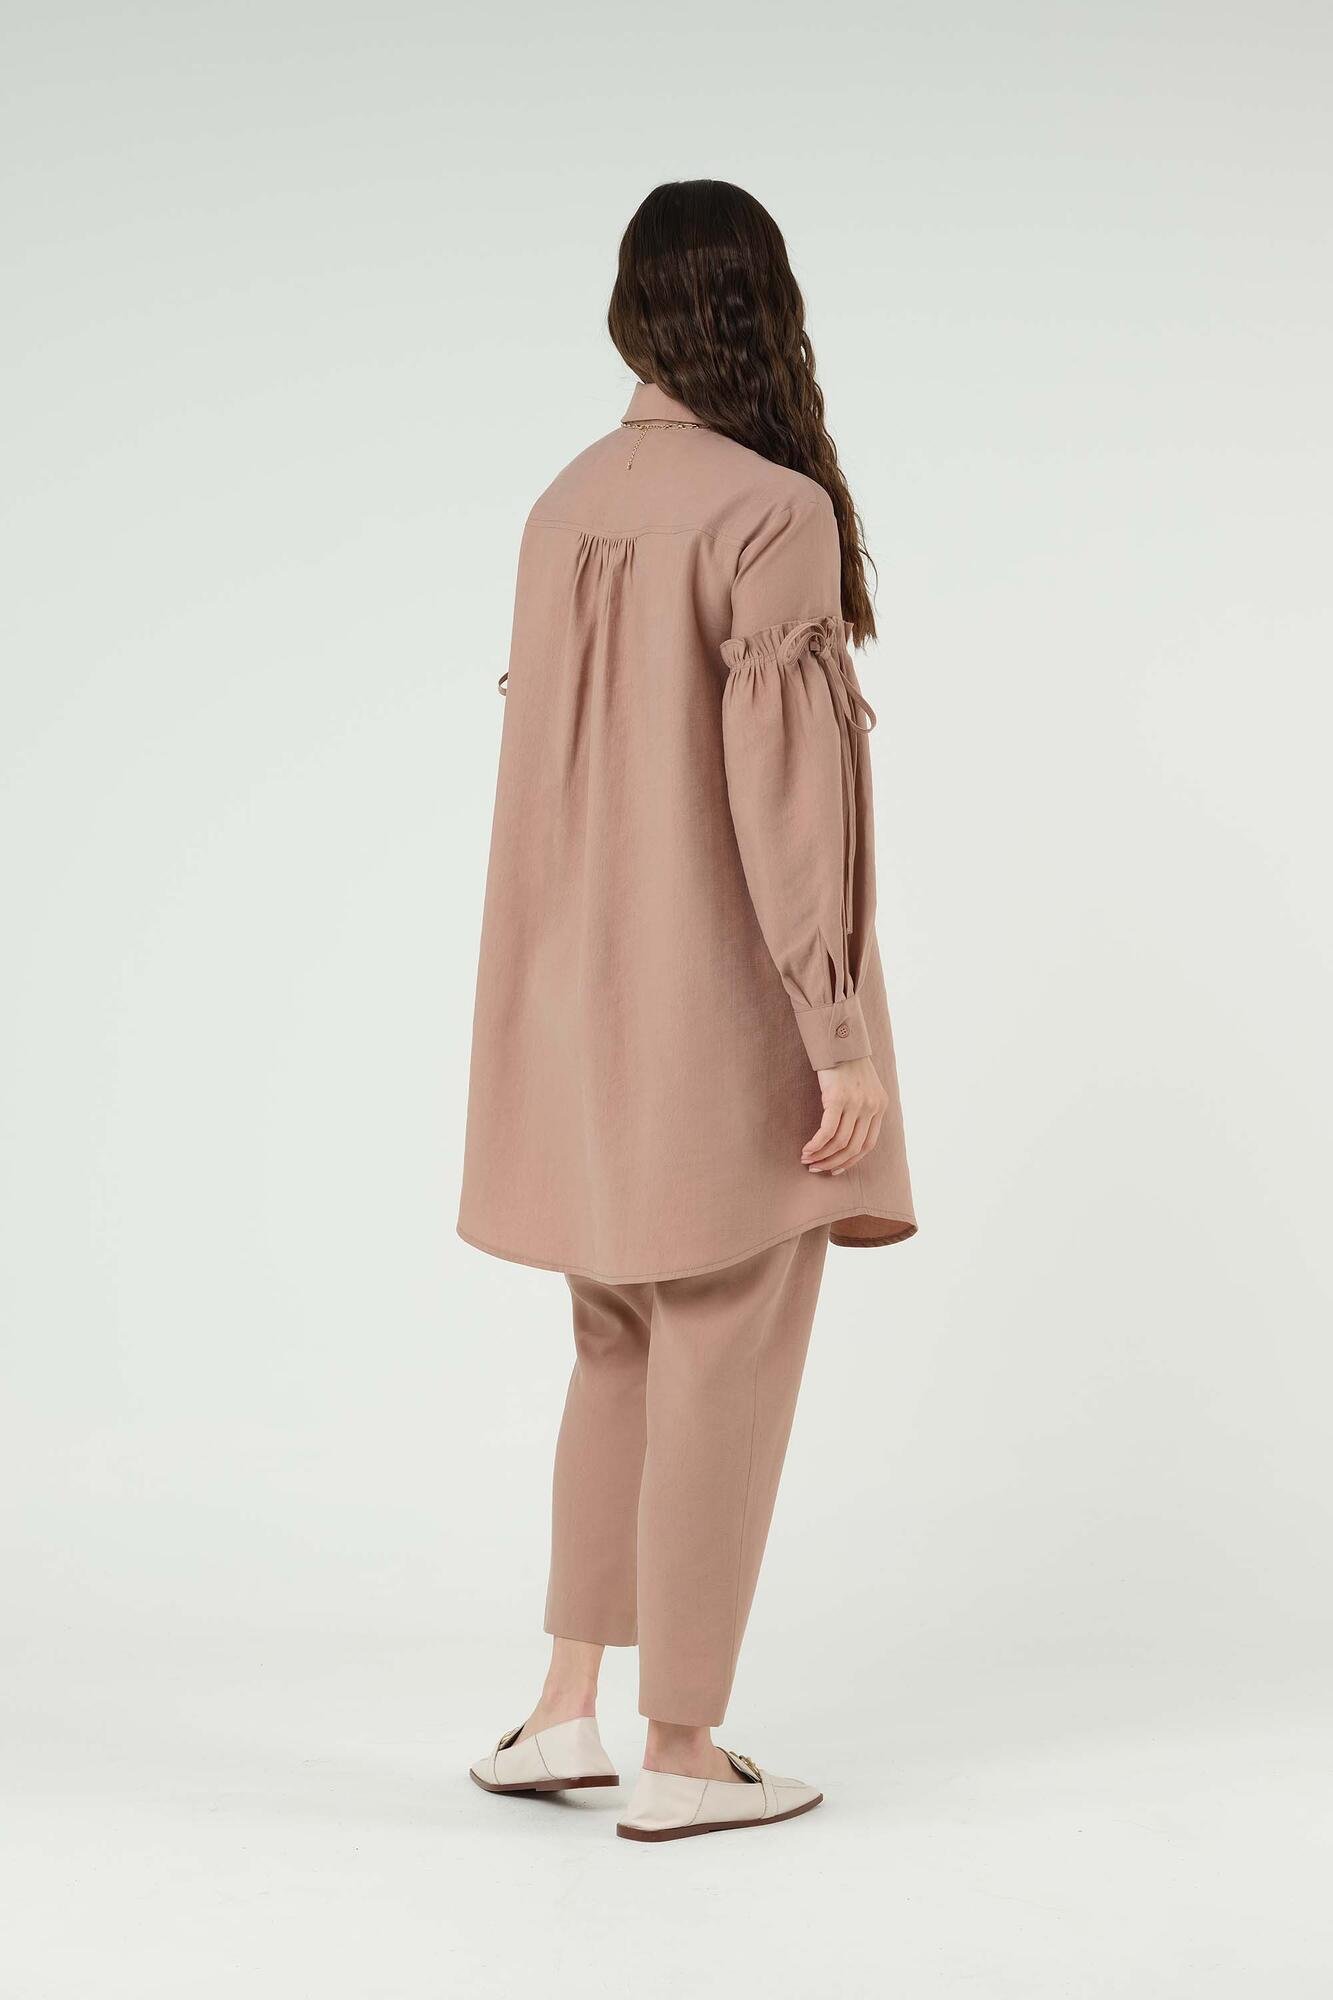 Strapped Arms Tunic Soft Powder Pink 